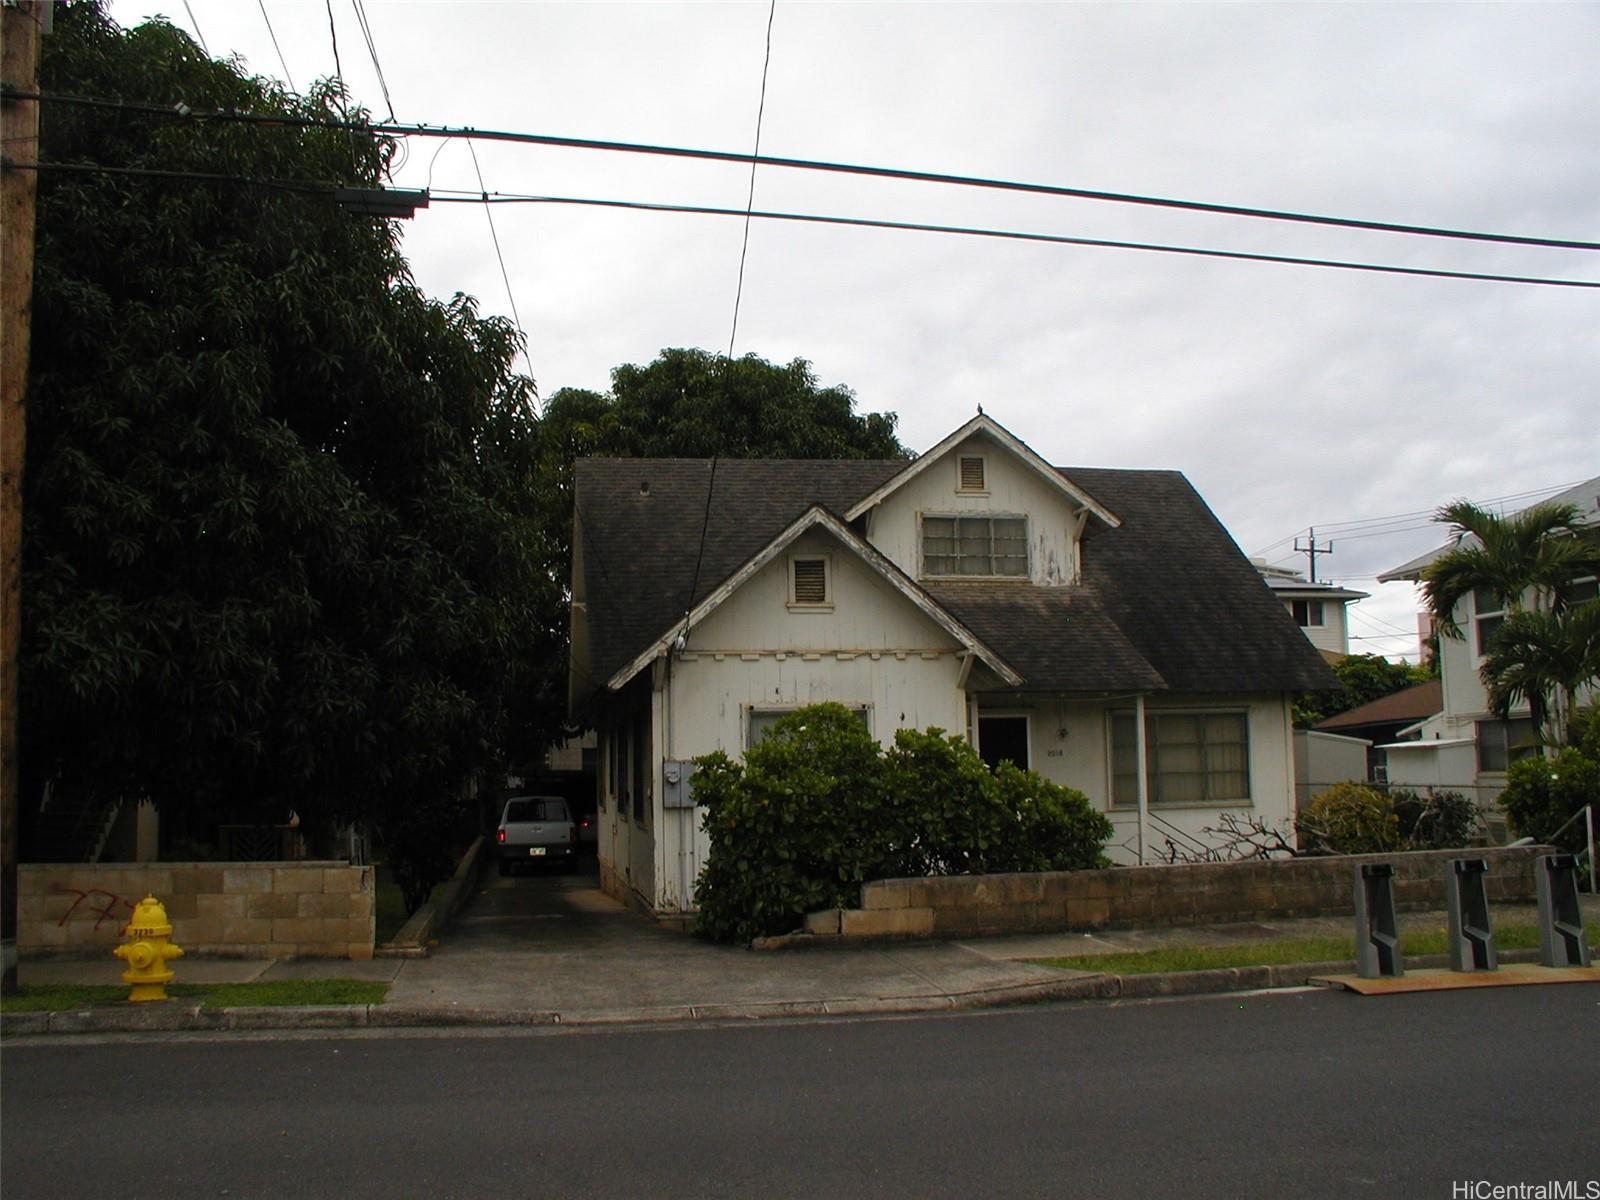 a view of a house with a street